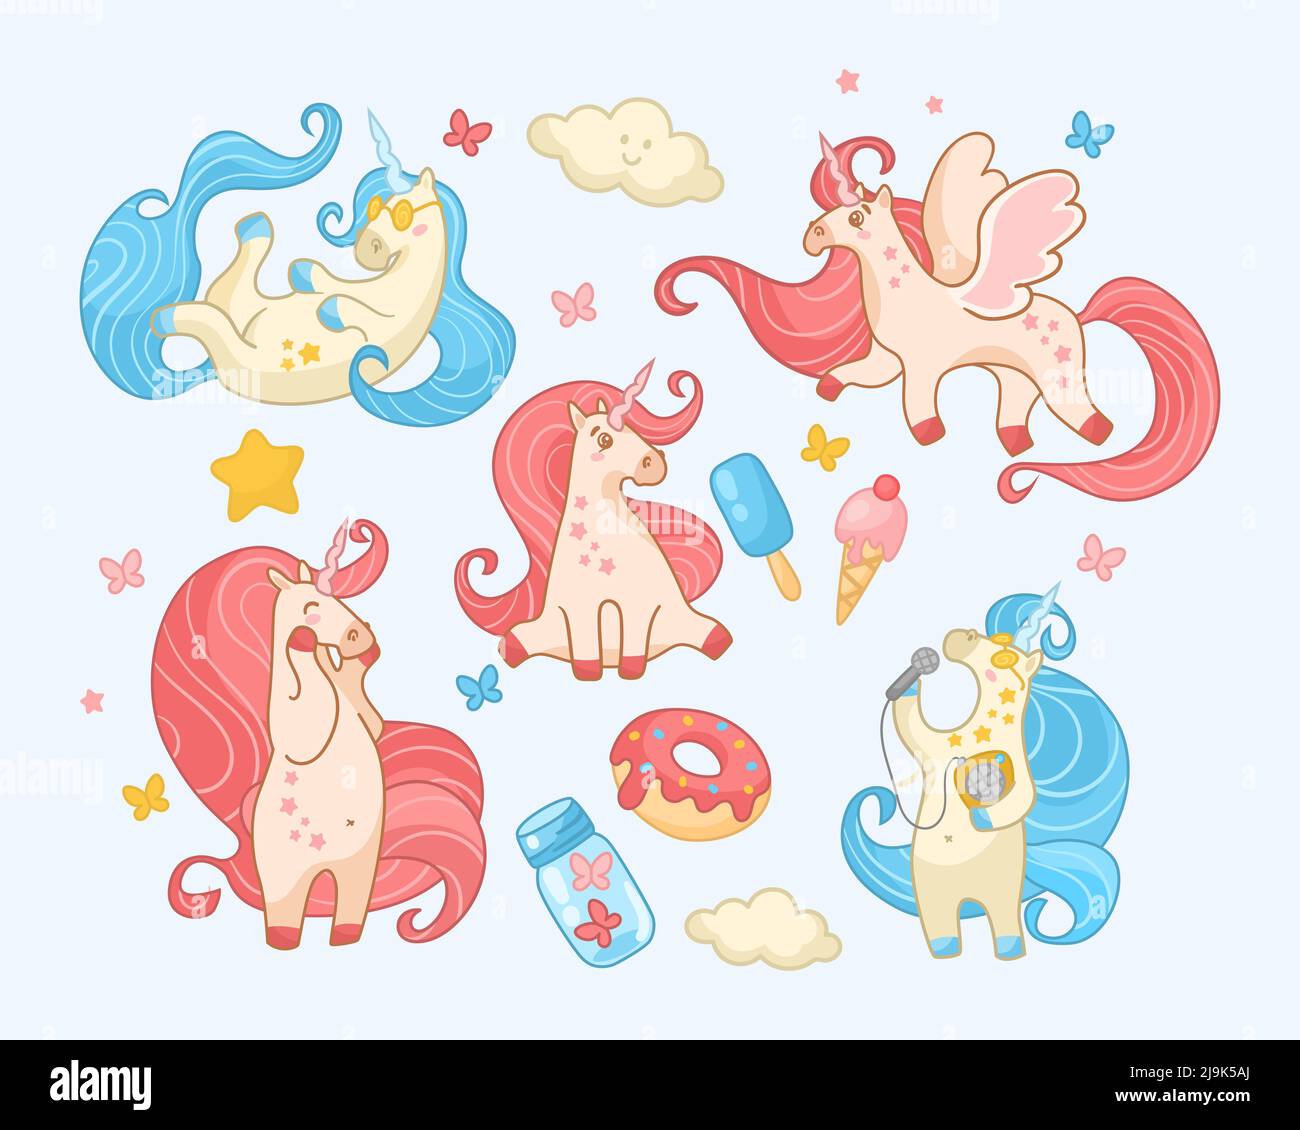 Baby horse cute flowers Stock Vector Images - Alamy